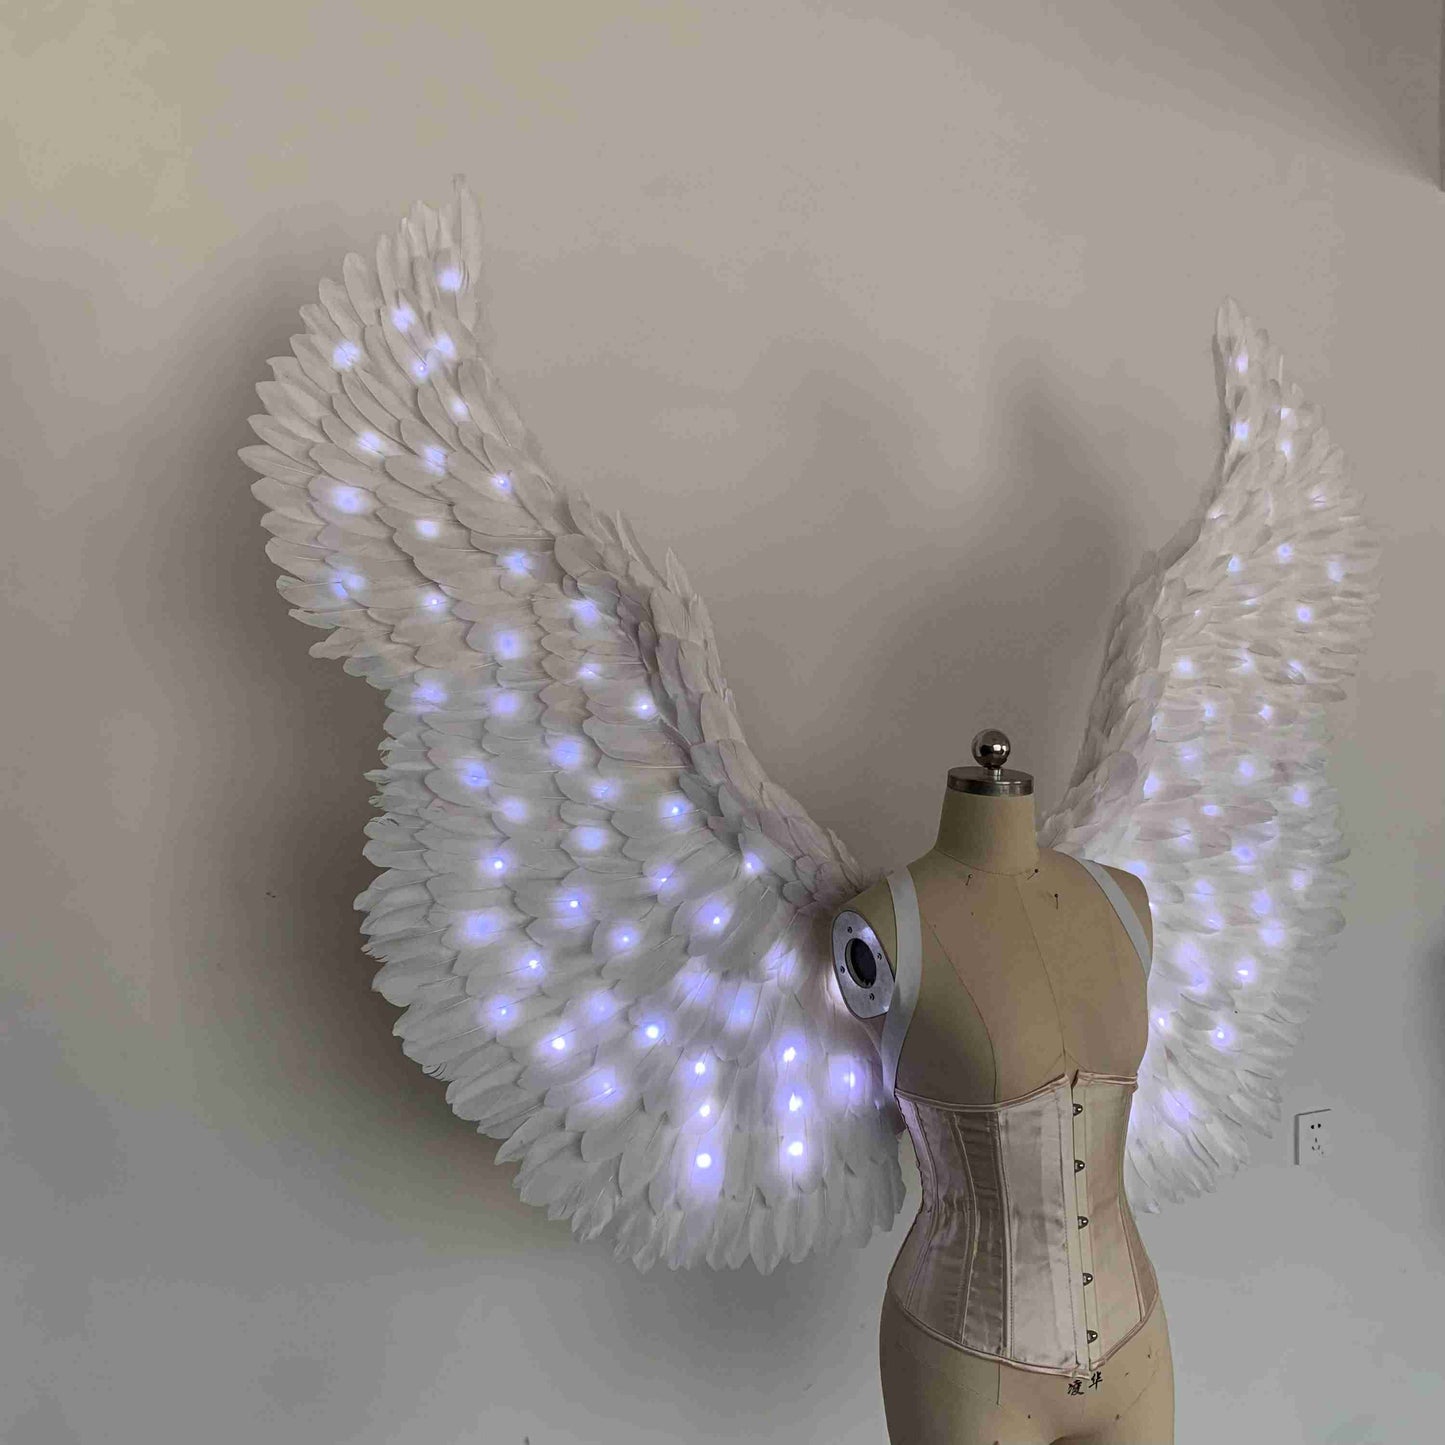 Our white color angel wings from the right side. Made from goose feathers with LED lights inside. Wings for angel costume. Suitable for photoshoots.